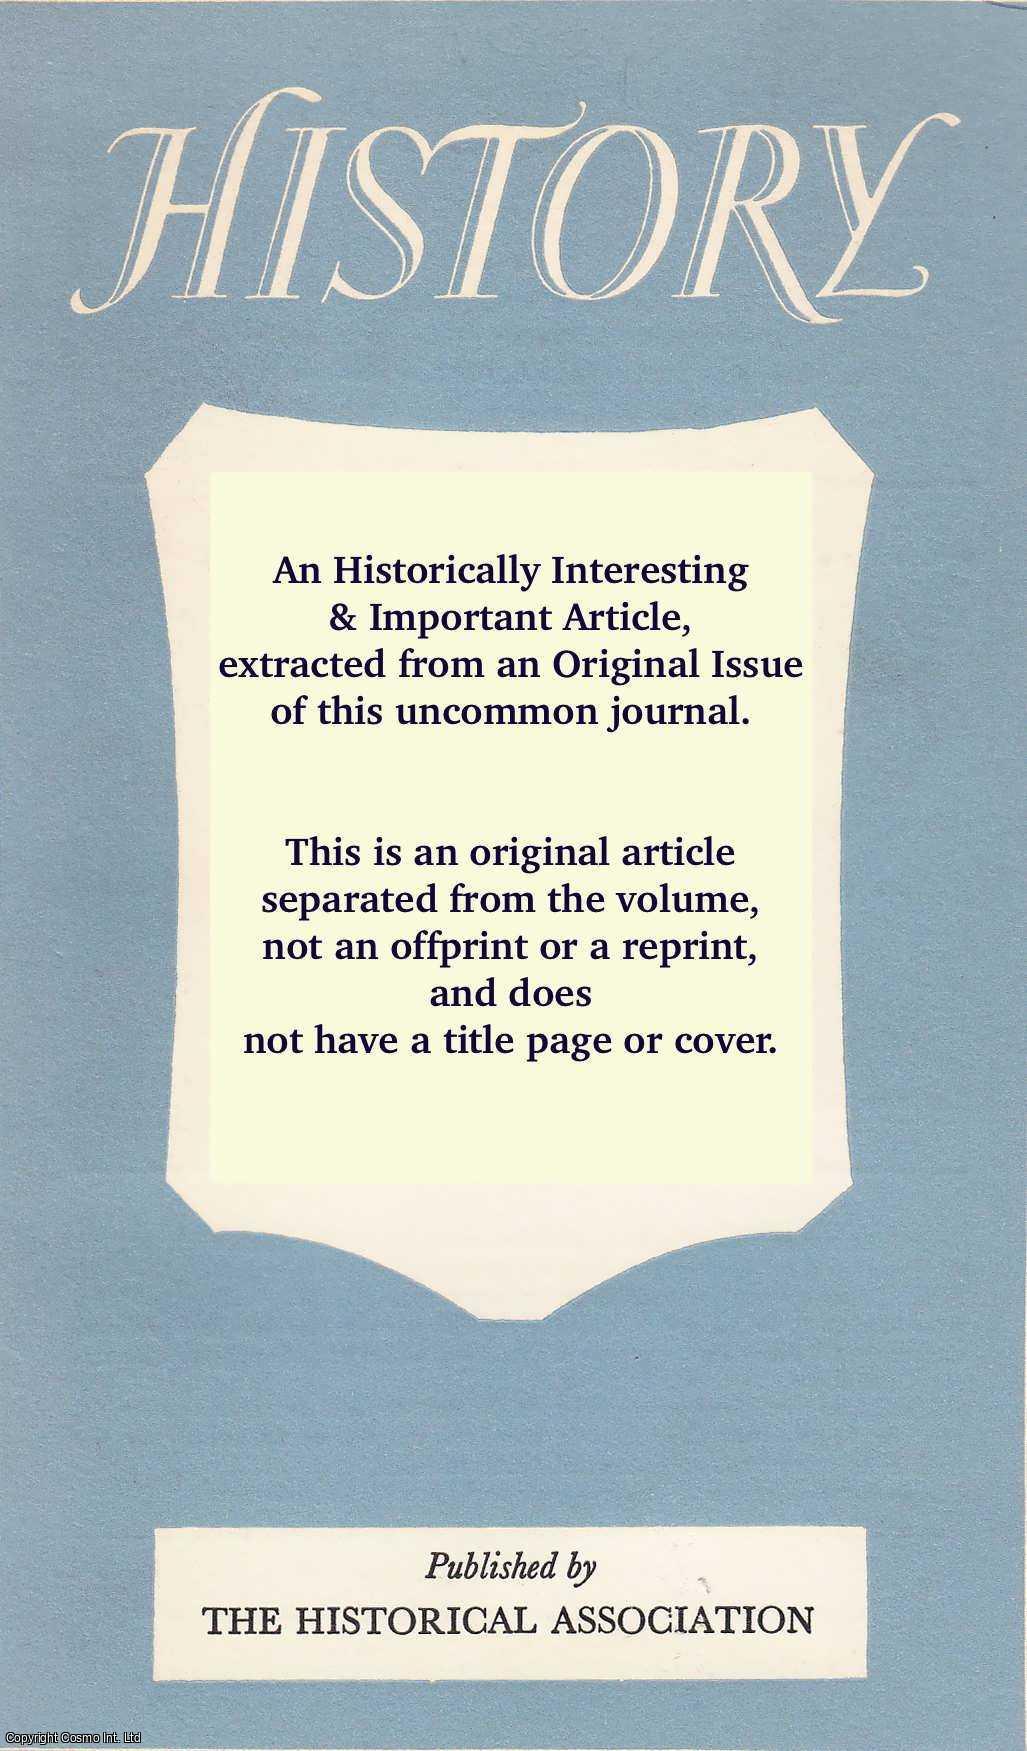 J.H. Baxter - The International Committee of Historical Sciences. An original article from the Quarterly Journal of the Historical Association, 1930.